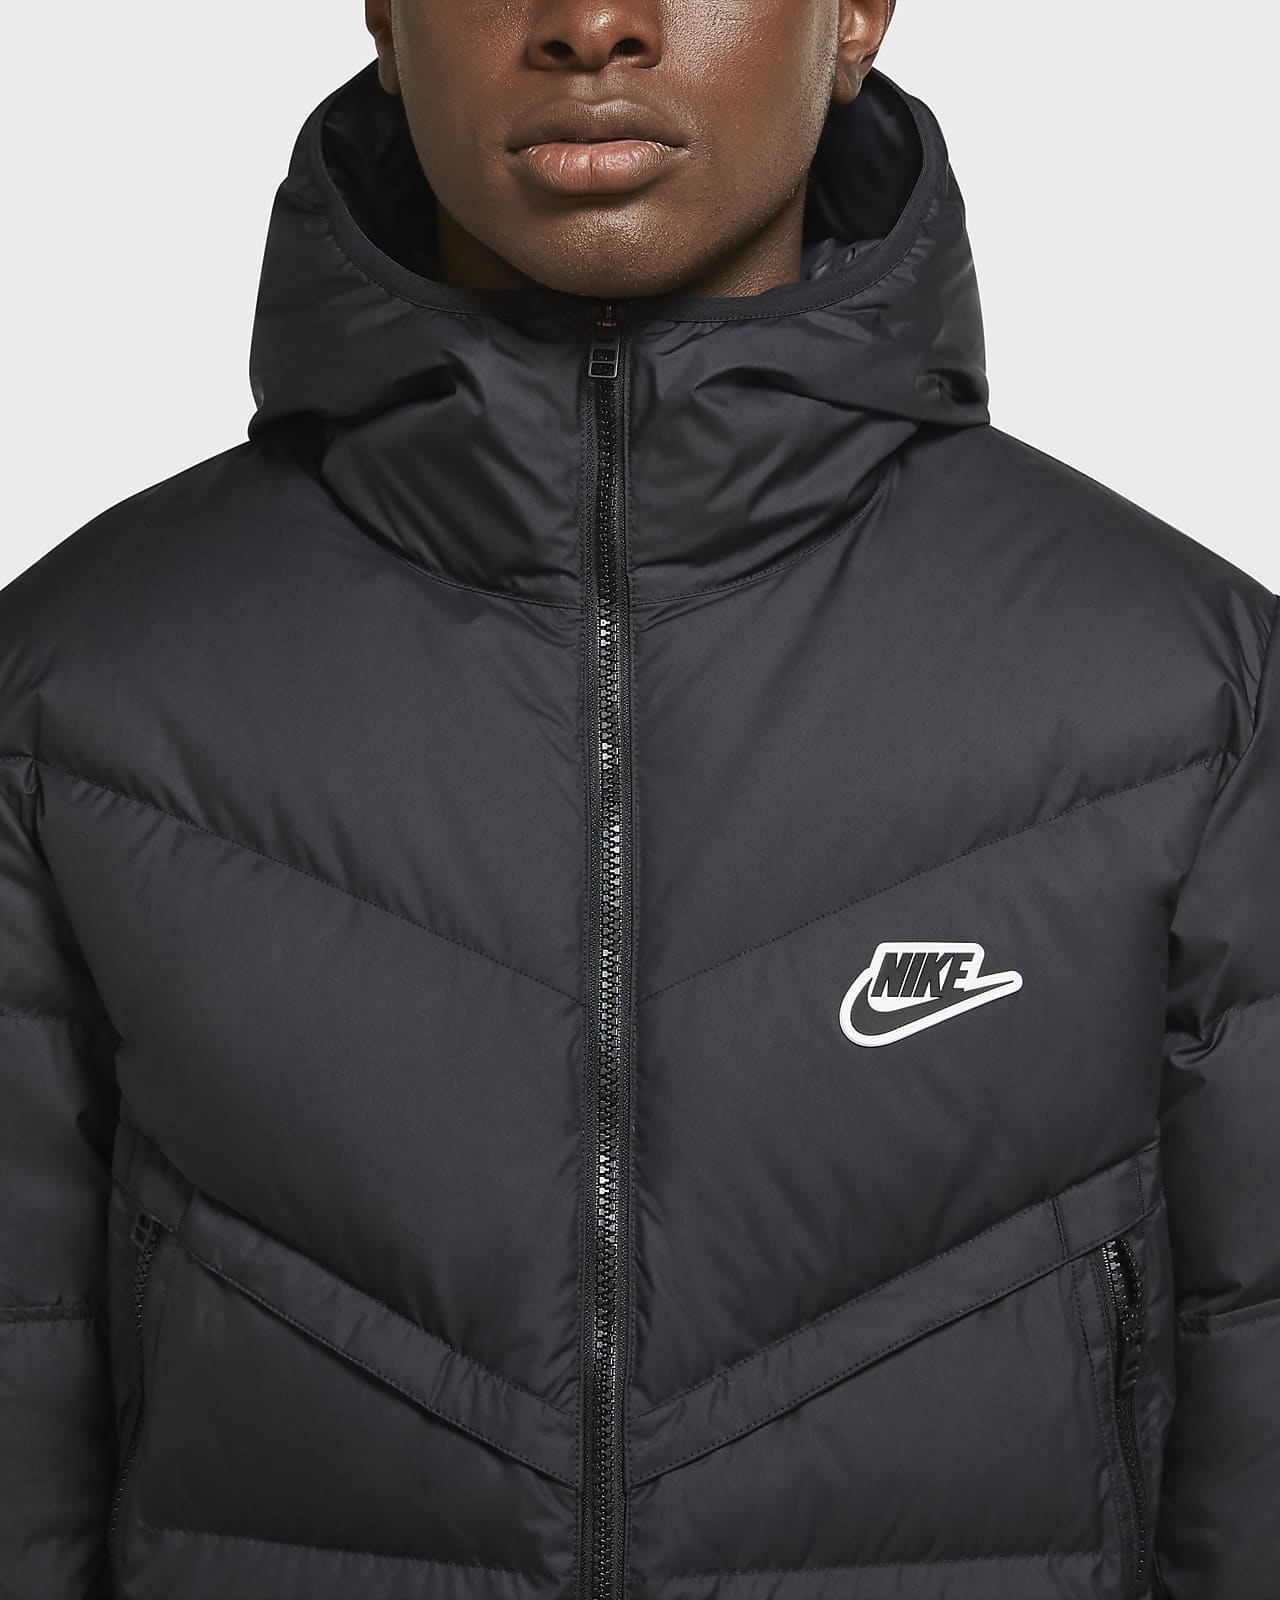 Lío Beca melodía Windrunner Down Fill Nike Store, SAVE 39% - aveclumiere.com